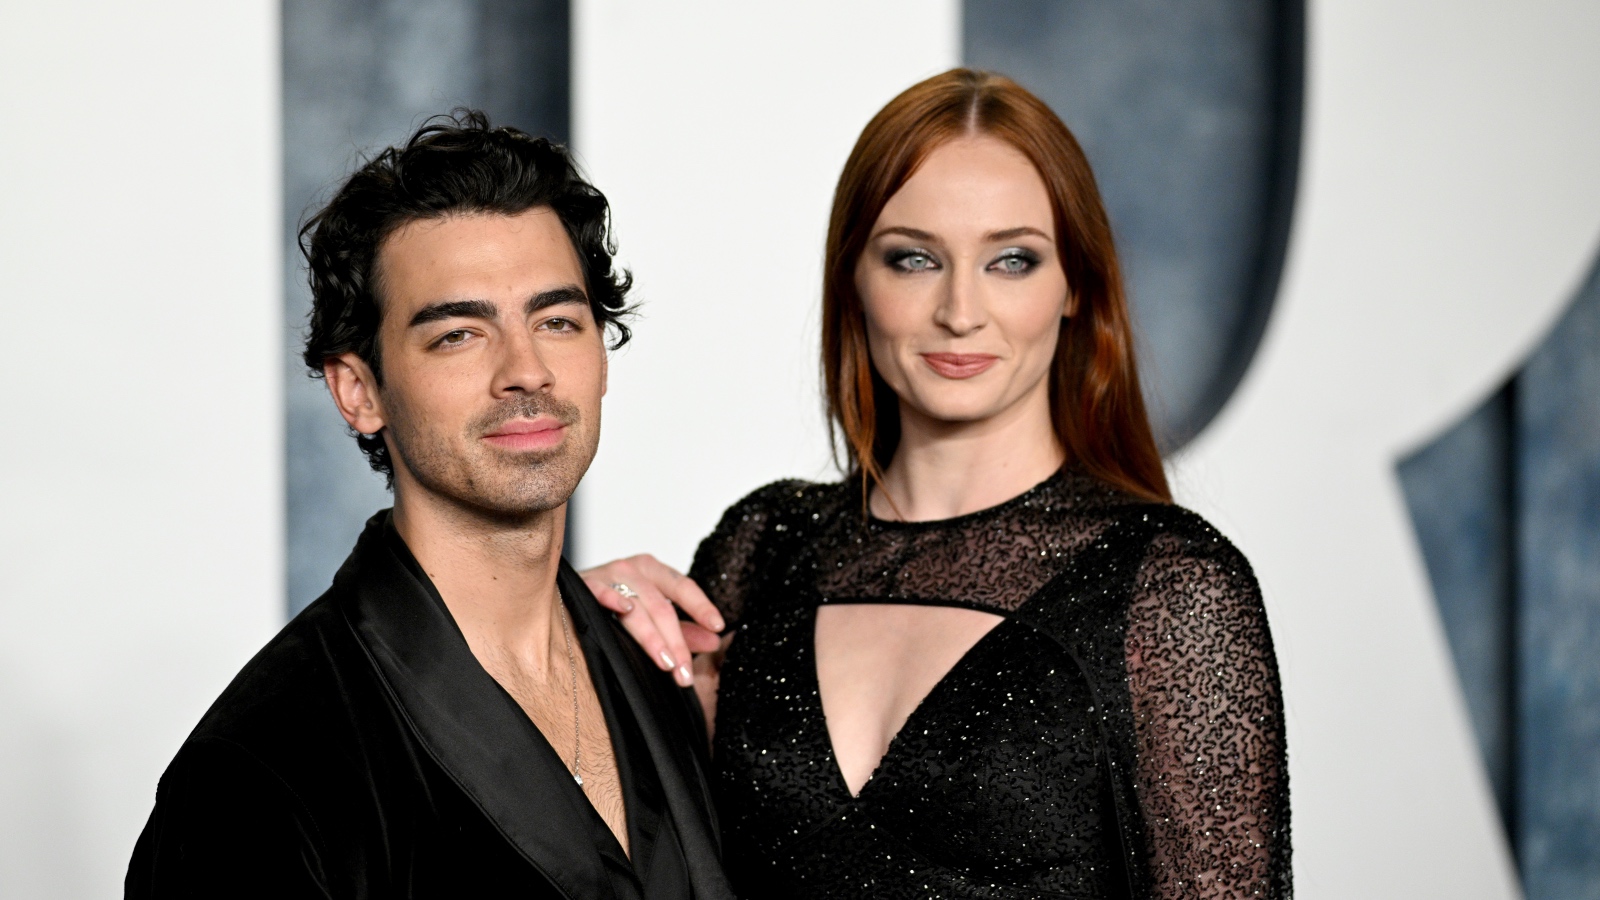 singer Joe Jonas and his wife Sophie Turner on the red carpet